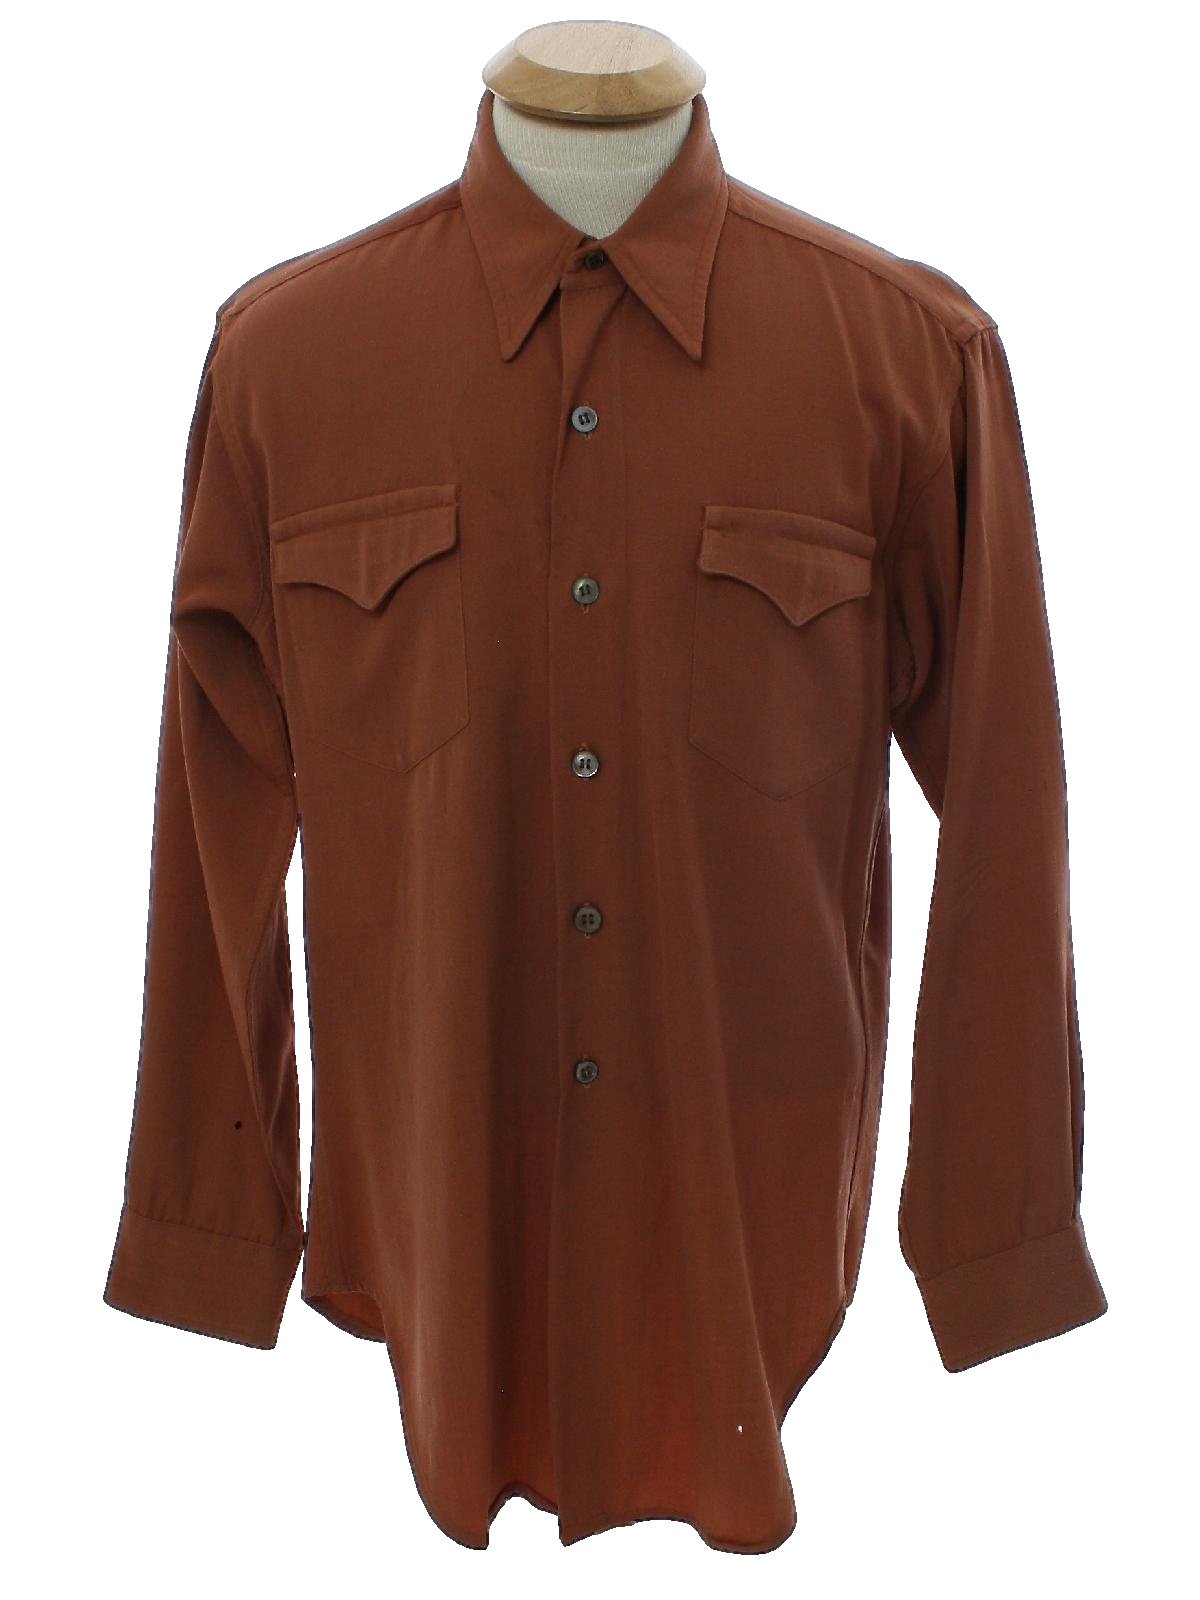 1950s Vintage Gabardine Shirt: Early 50s -Levis DeLuxe- Mens rosewood ...